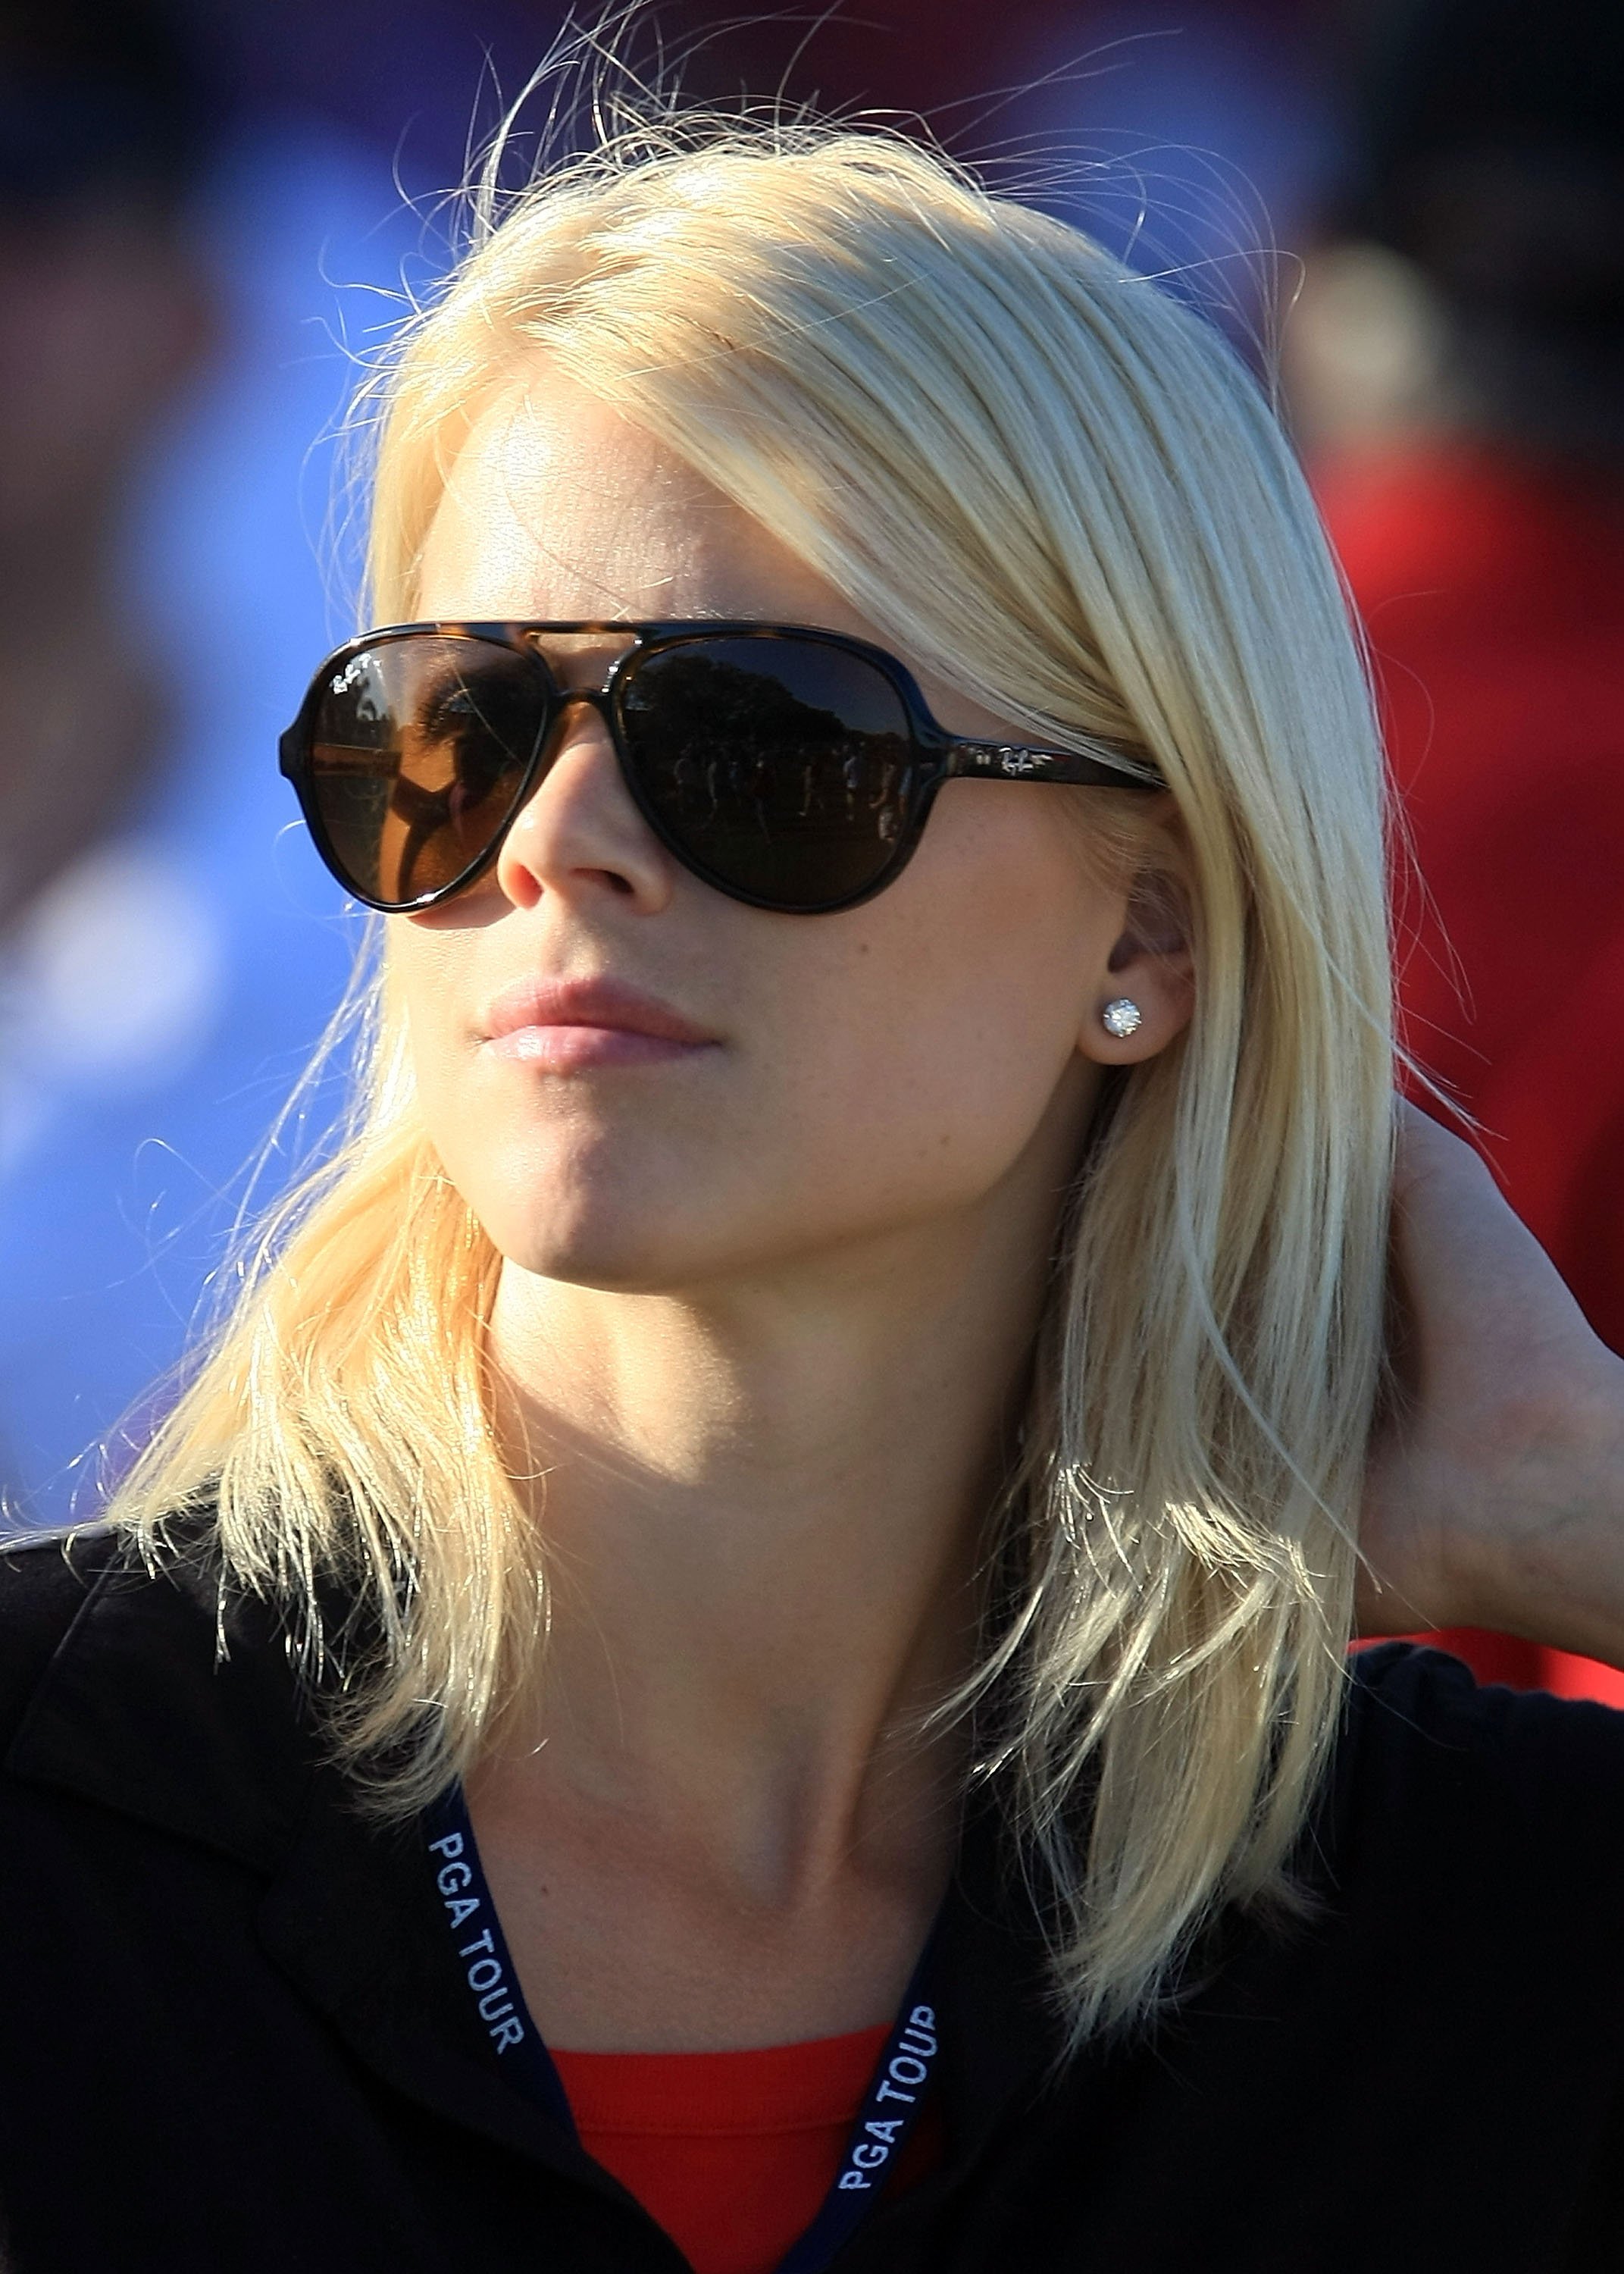 Elin Nordegren watching her husband Tiger Woods playing during the final round of the Arnold Palmer Invitational at the Bay Hill Club & Lodge on March 29, 2009 in Orlando, Florida. / Source: Getty Images